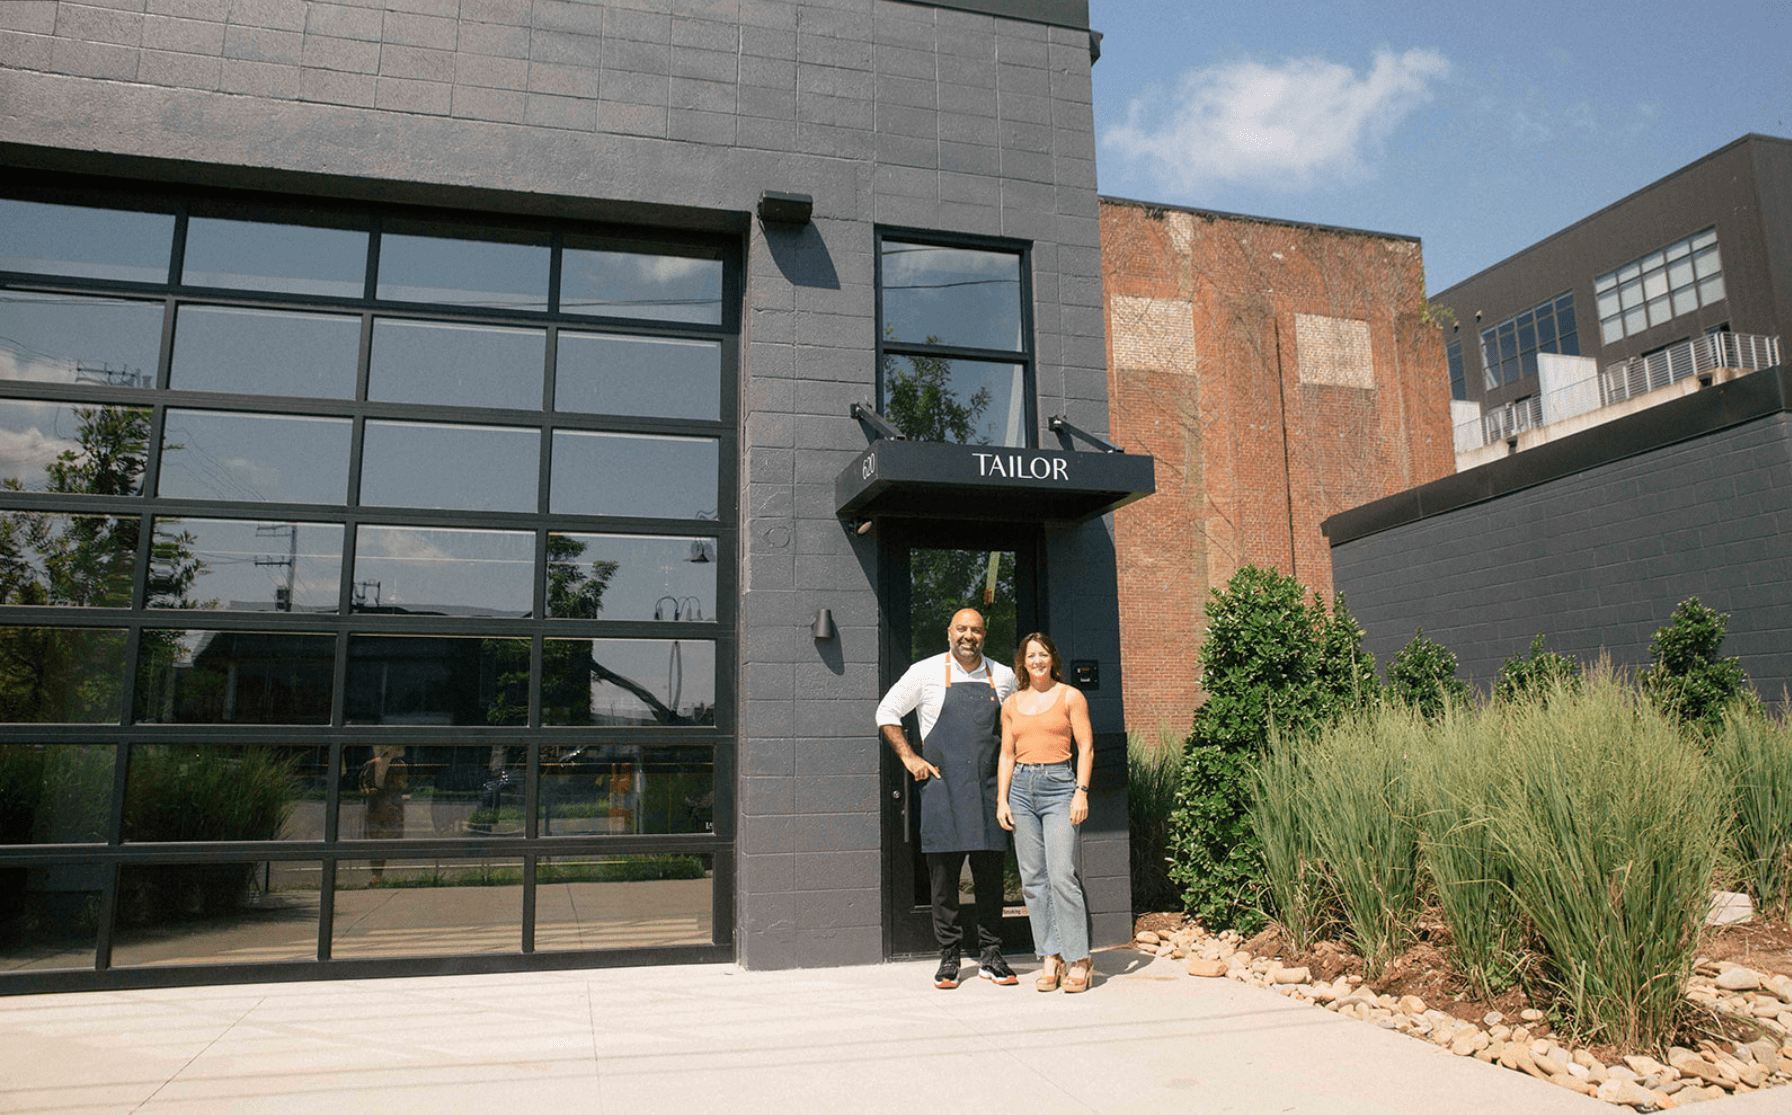 Vivek Surti and Heather Southerland outside the new TAILOR restaurant in Nashville located at 620 Taylor Street.